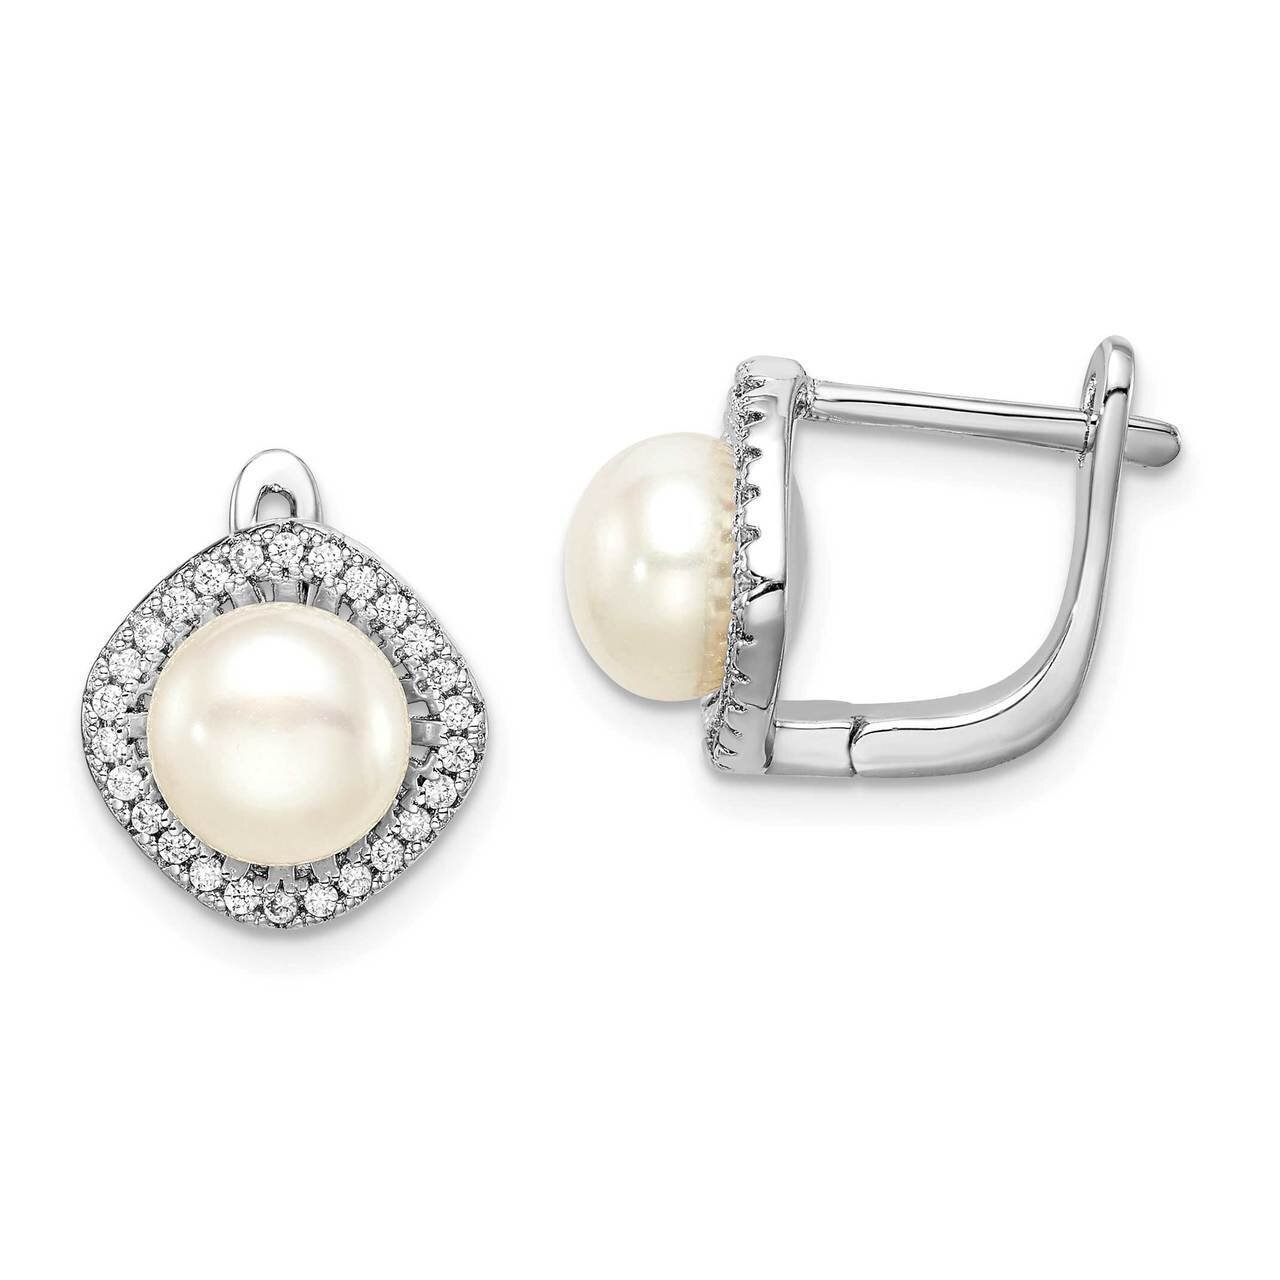 7-8mm White Button Freshwater Cultured Pearl CZ Diamond Earrings Sterling Silver Rhodium Plated QE15261